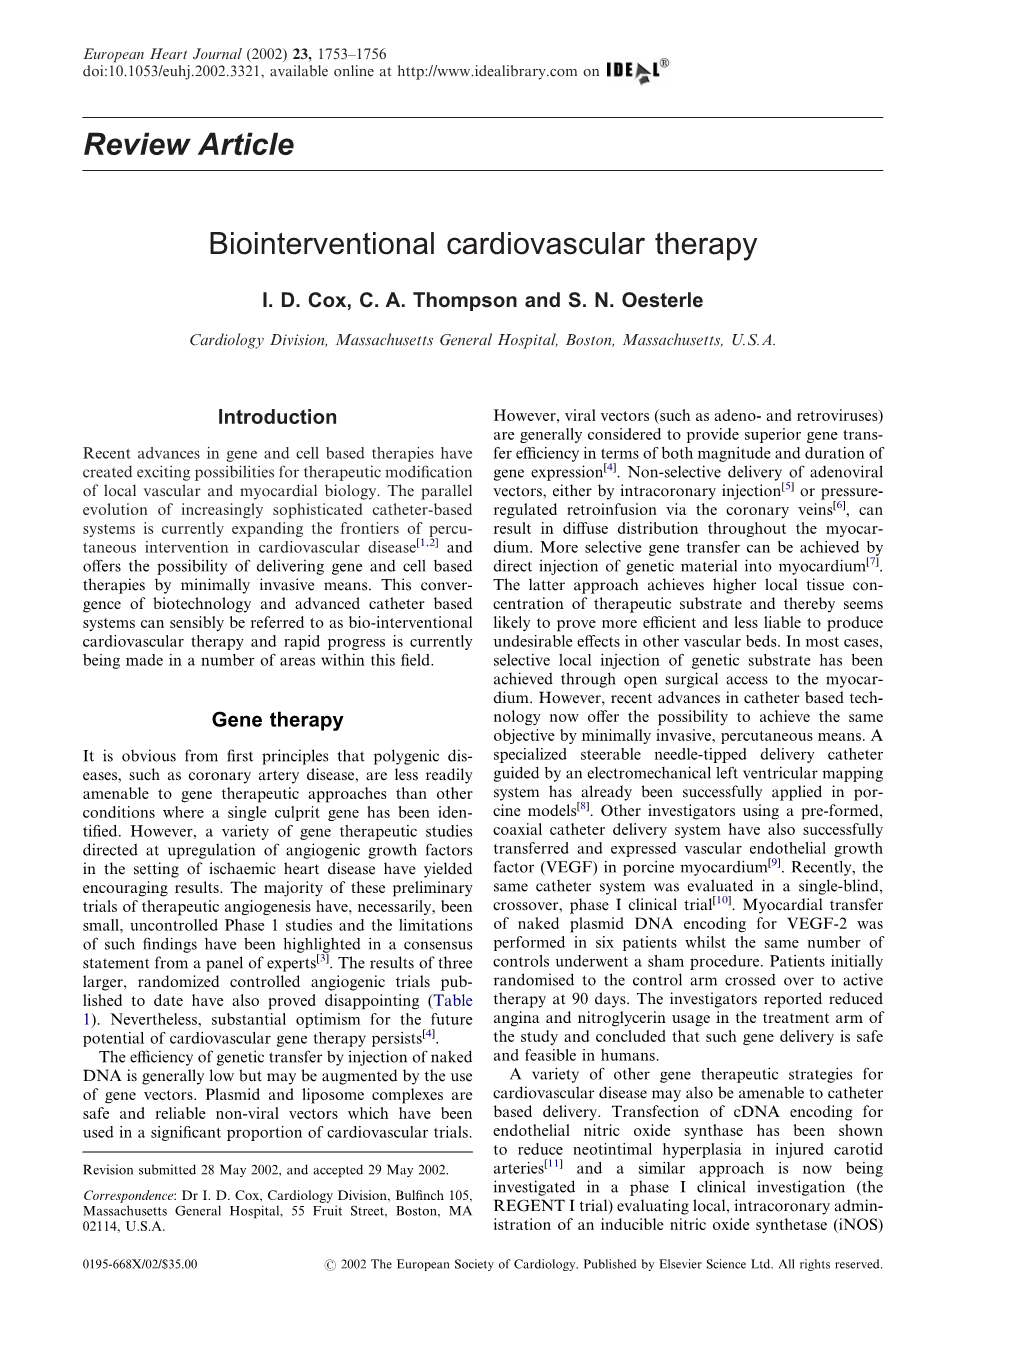 Biointerventional Cardiovascular Therapy